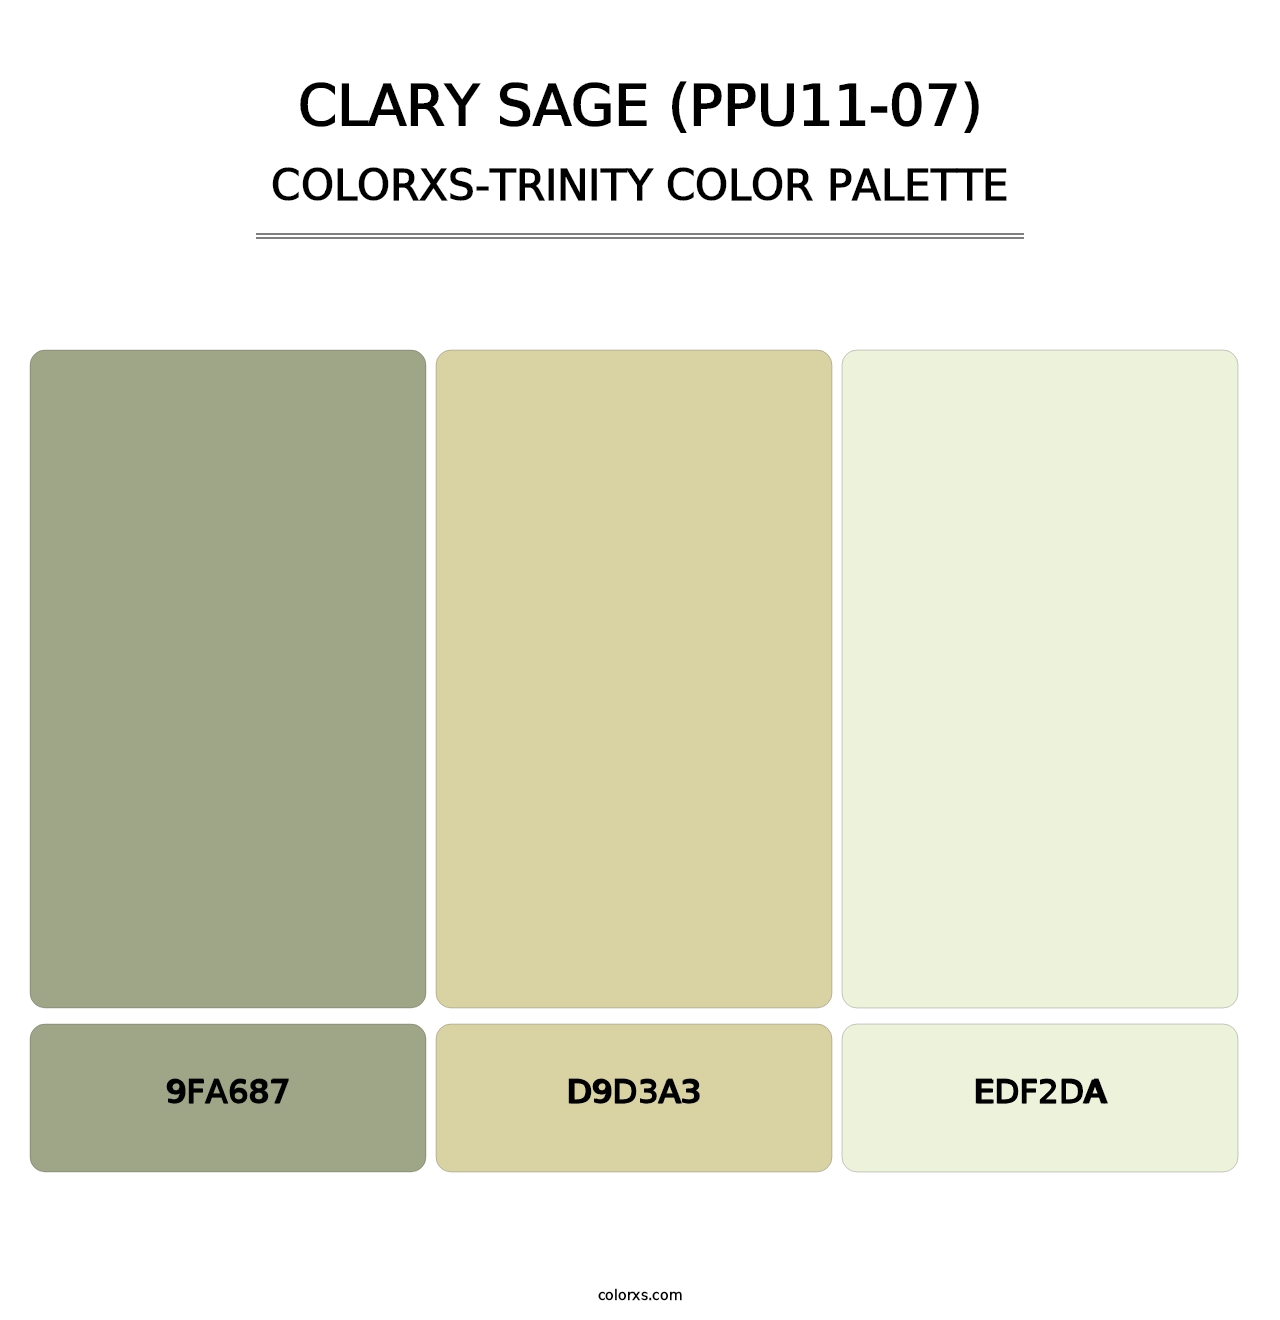 Clary Sage (PPU11-07) - Colorxs Trinity Palette